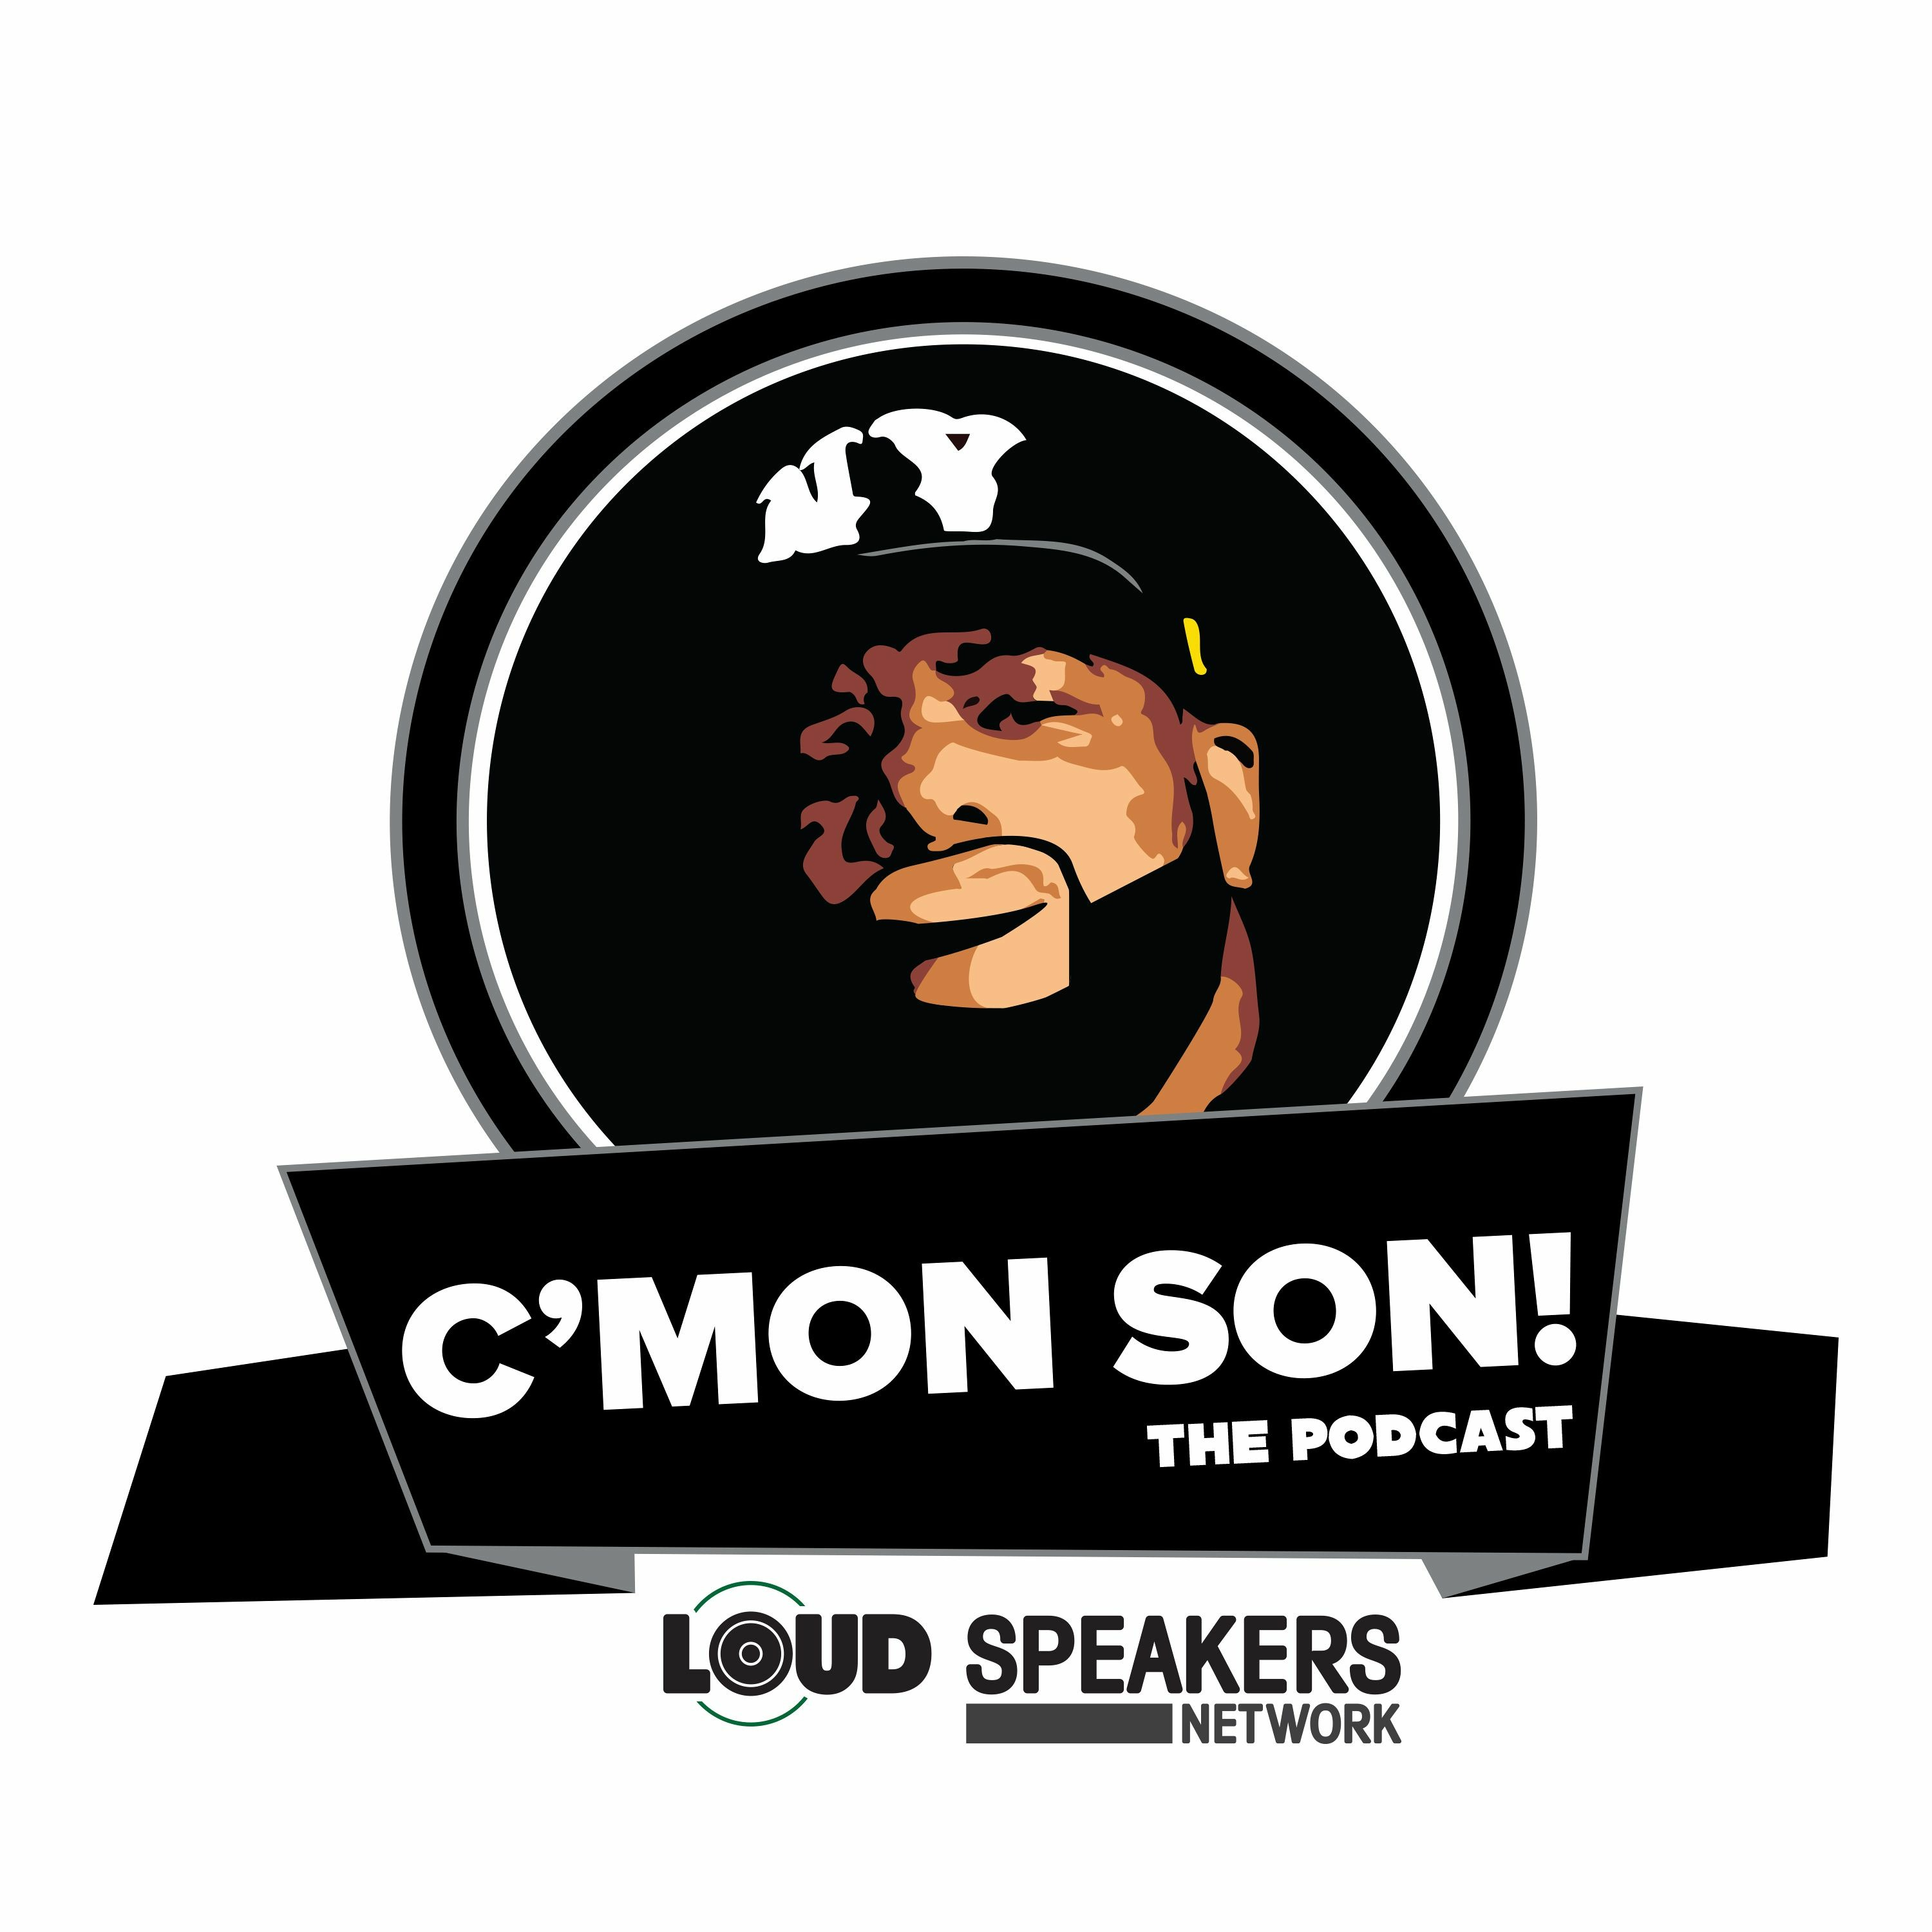 Episode #134: State Attorney Kim Foxx | C'Mon Son! Roast ft. Mike Bloomberg, Deontay Wilder & More